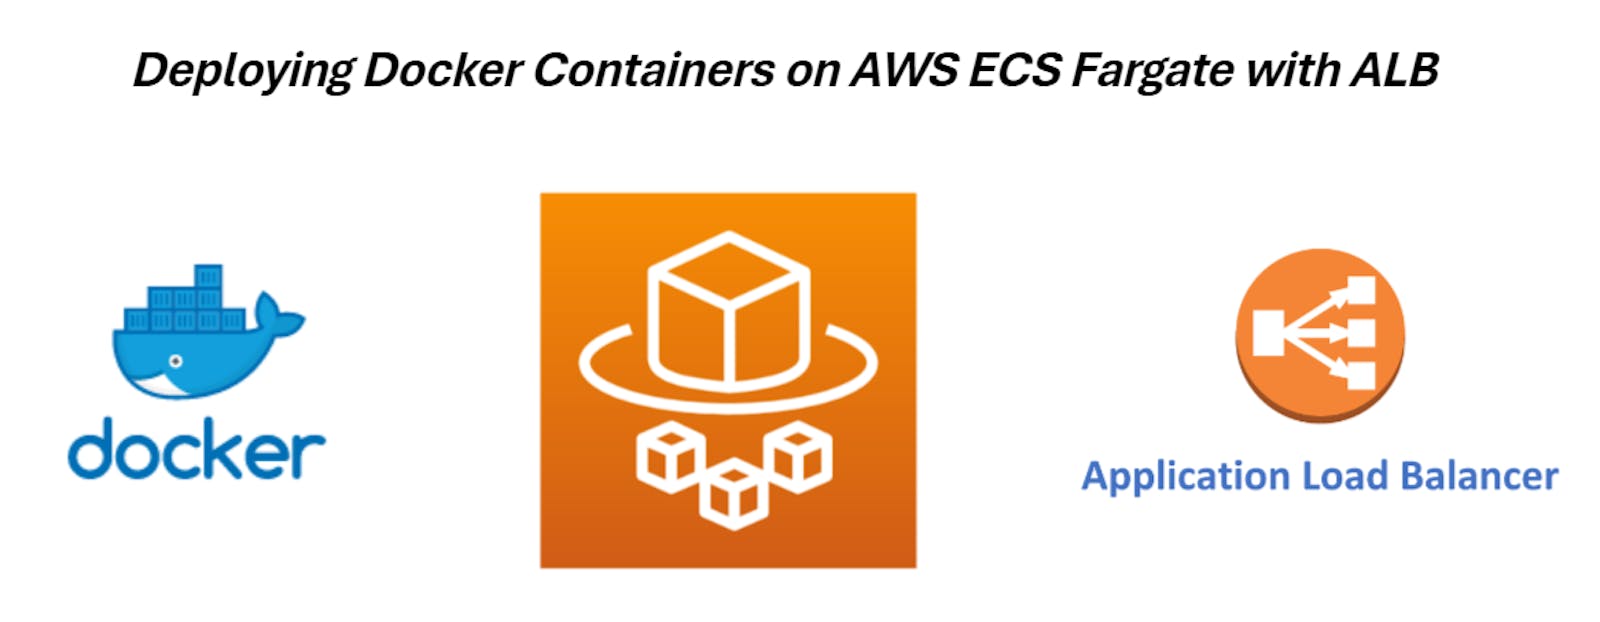 Deploying Docker Containers on AWS ECS Fargate with ALB: A Step-by-Step Guide